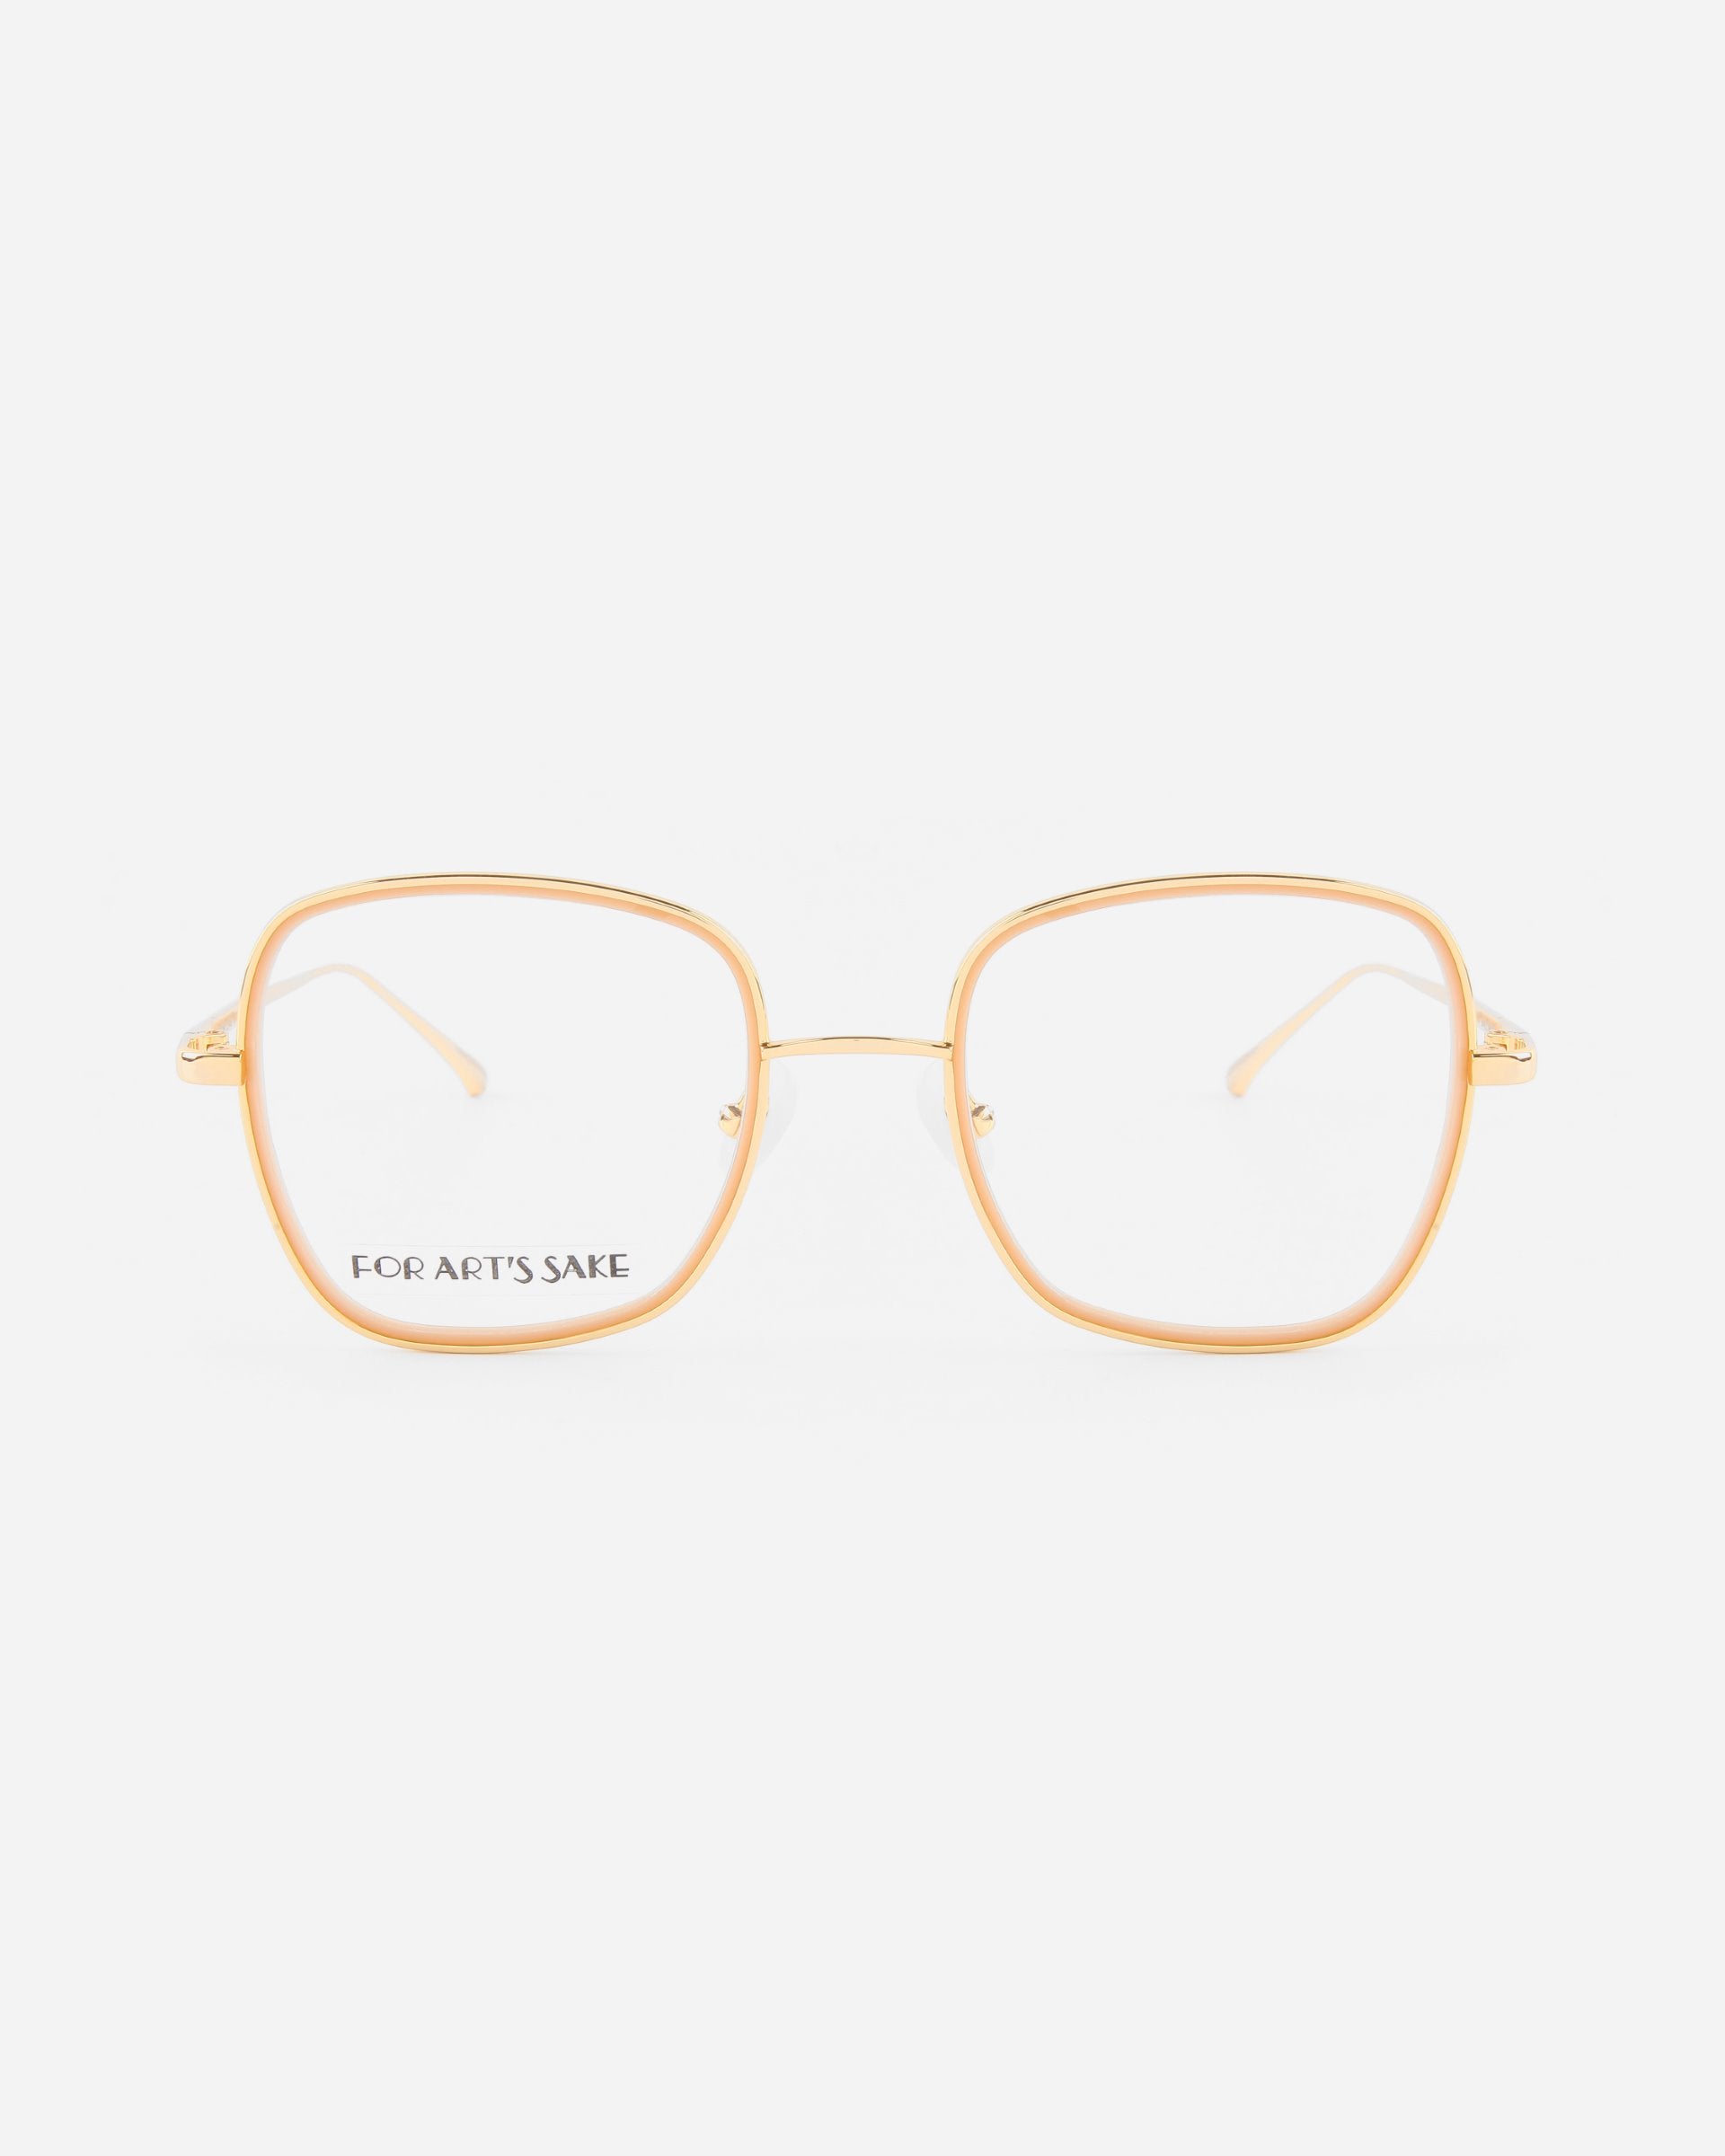 A pair of 18-karat gold-plated eyeglasses with large, slightly rounded square lenses. The frame is thin and elegant, with transparent nose pads. The inside of the left lens is printed with the words "FOR ARTS SAKE." These stylish Coconut eyeglasses by For Art's Sake® also come with a Blue Light Filter for added comfort.